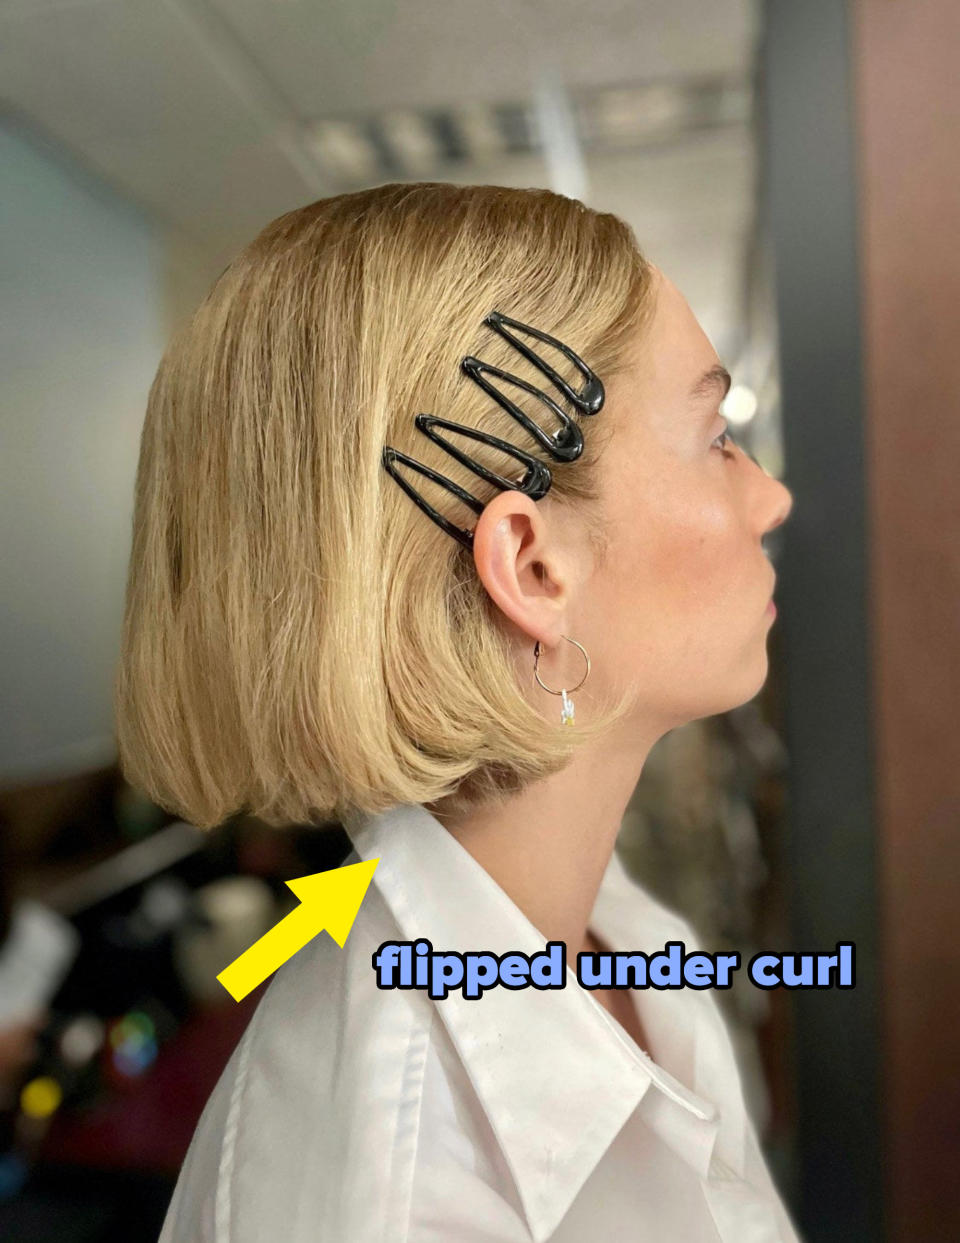 <div><p>"I would start the curl with the iron vertically. <b>And then as I crawled up towards the root, I would turn the iron horizontally. That just gave us the right amount of movement but also a lot of volume</b>," she explained. </p><p>"To finish, I would use <a href="https://www.amazon.com/dp/B07PZKNLS6?tag=buzz0f-20&ascsubtag=6319500%2C10%2C25%2Cbf-verizon%2C0%2C0" rel="nofollow noopener" target="_blank" data-ylk="slk:Kevin Murphy Session Spray Flex" class="link ">Kevin Murphy Session Spray Flex</a> to seal the curl in and seal out any humidity. Then I would finish with a little bit of <a href="https://go.redirectingat.com?id=74679X1524629&sref=https%3A%2F%2Fwww.buzzfeed.com%2Ffabianabuontempo%2Fdo-revenge-hairstyles&url=https%3A%2F%2Fwww.sephora.com%2Fproduct%2Fmilk-anti-frizz-leave-in-nourishing-treatment-P398751&xcust=6319500%7CBF-VERIZON&xs=1" rel="nofollow noopener" target="_blank" data-ylk="slk:Reverie Milk Anti-Frizz Leave-In Nourishing Treatment" class="link ">Reverie Milk Anti-Frizz Leave-In Nourishing Treatment</a>."</p></div><span> Katie Billard</span>